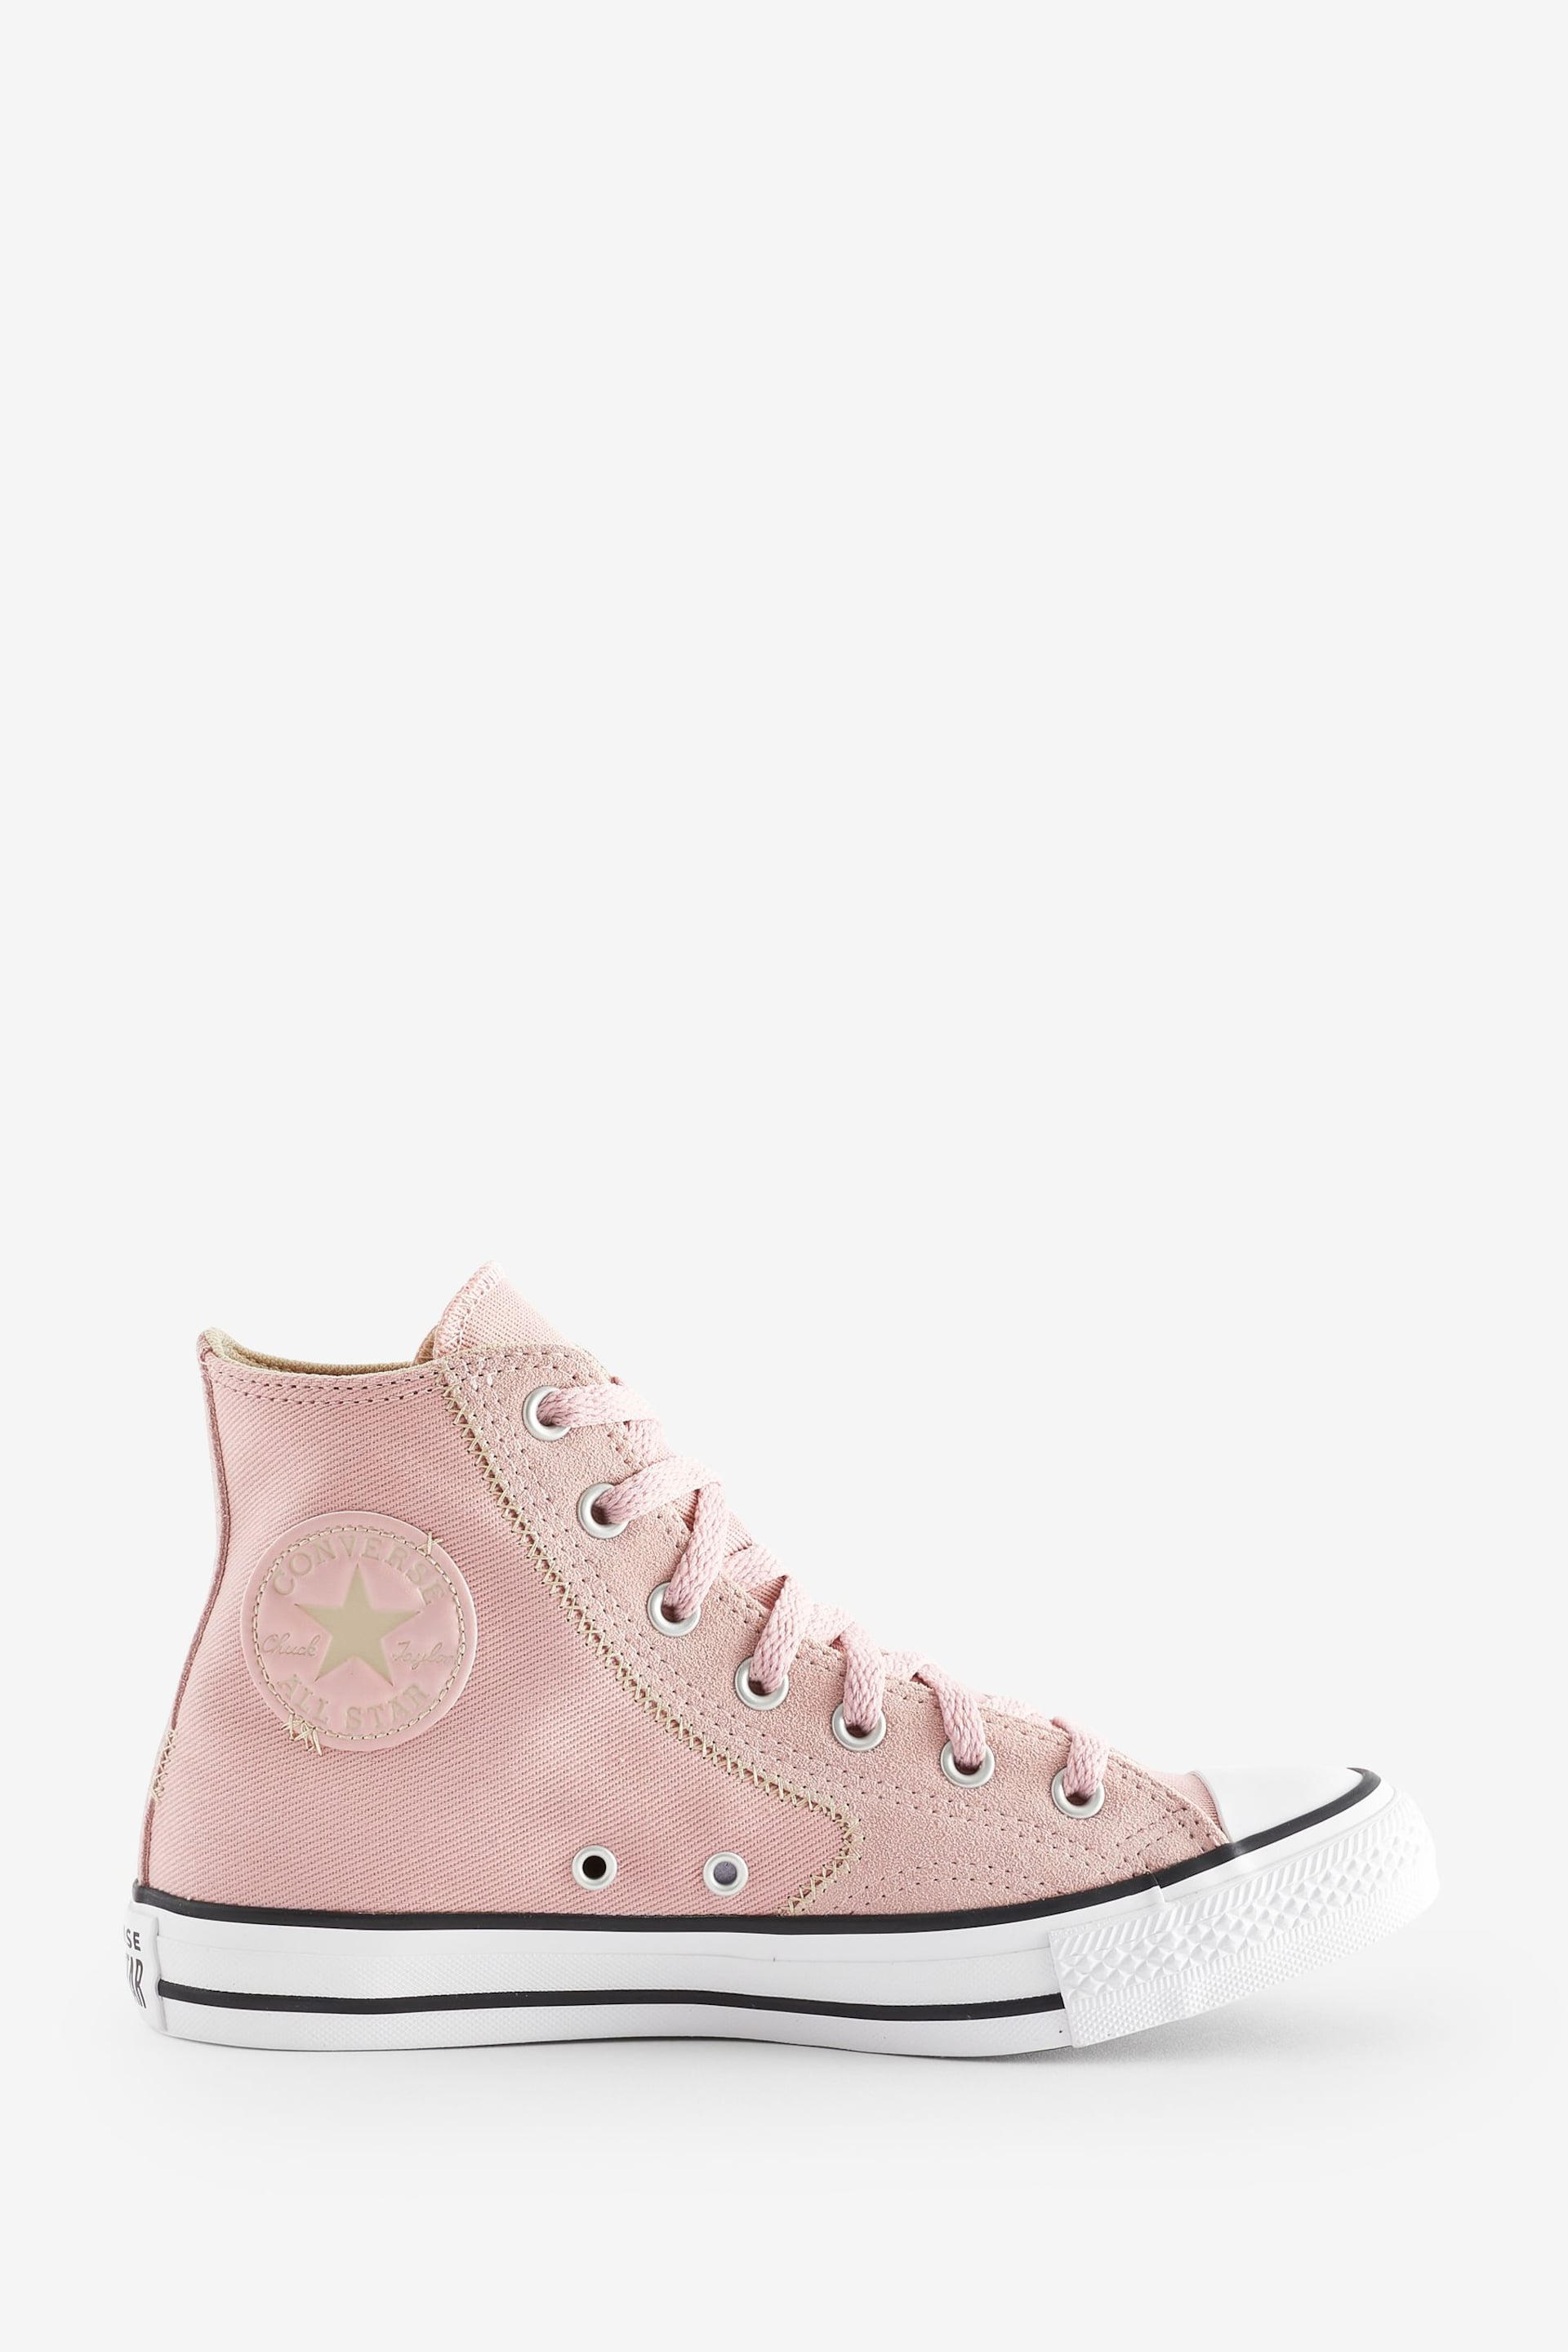 Converse Pink/White Chuck Taylor All Star High Top Trainers - Image 1 of 9